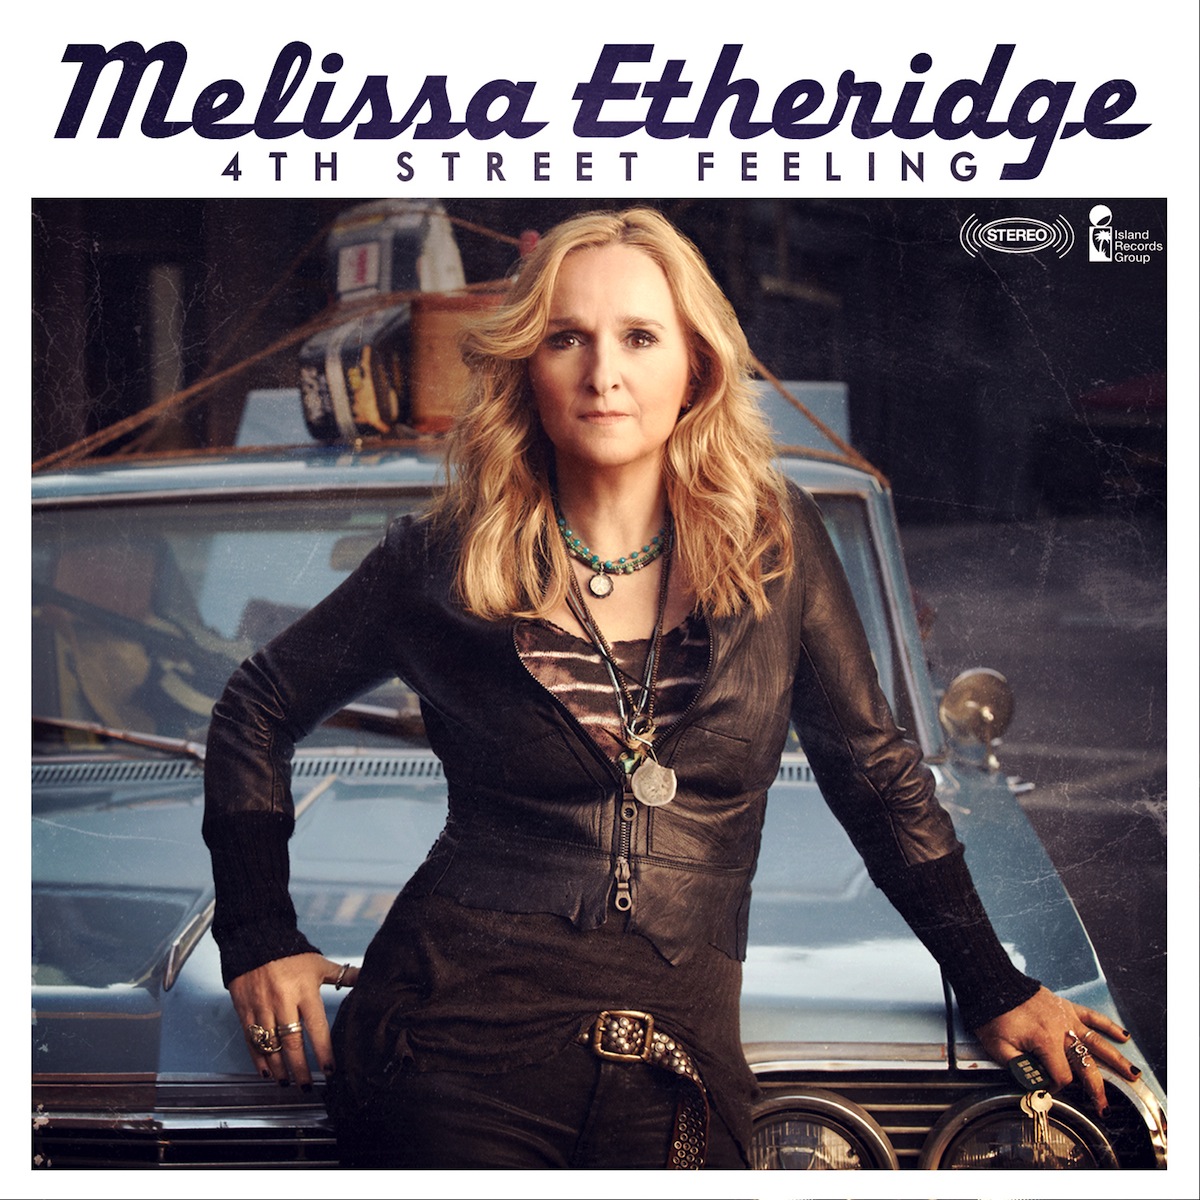 Sleeping Lesbian Strapon Porn - Melissa Etheridge: On Being On The Road - The Gay & Lesbian Review